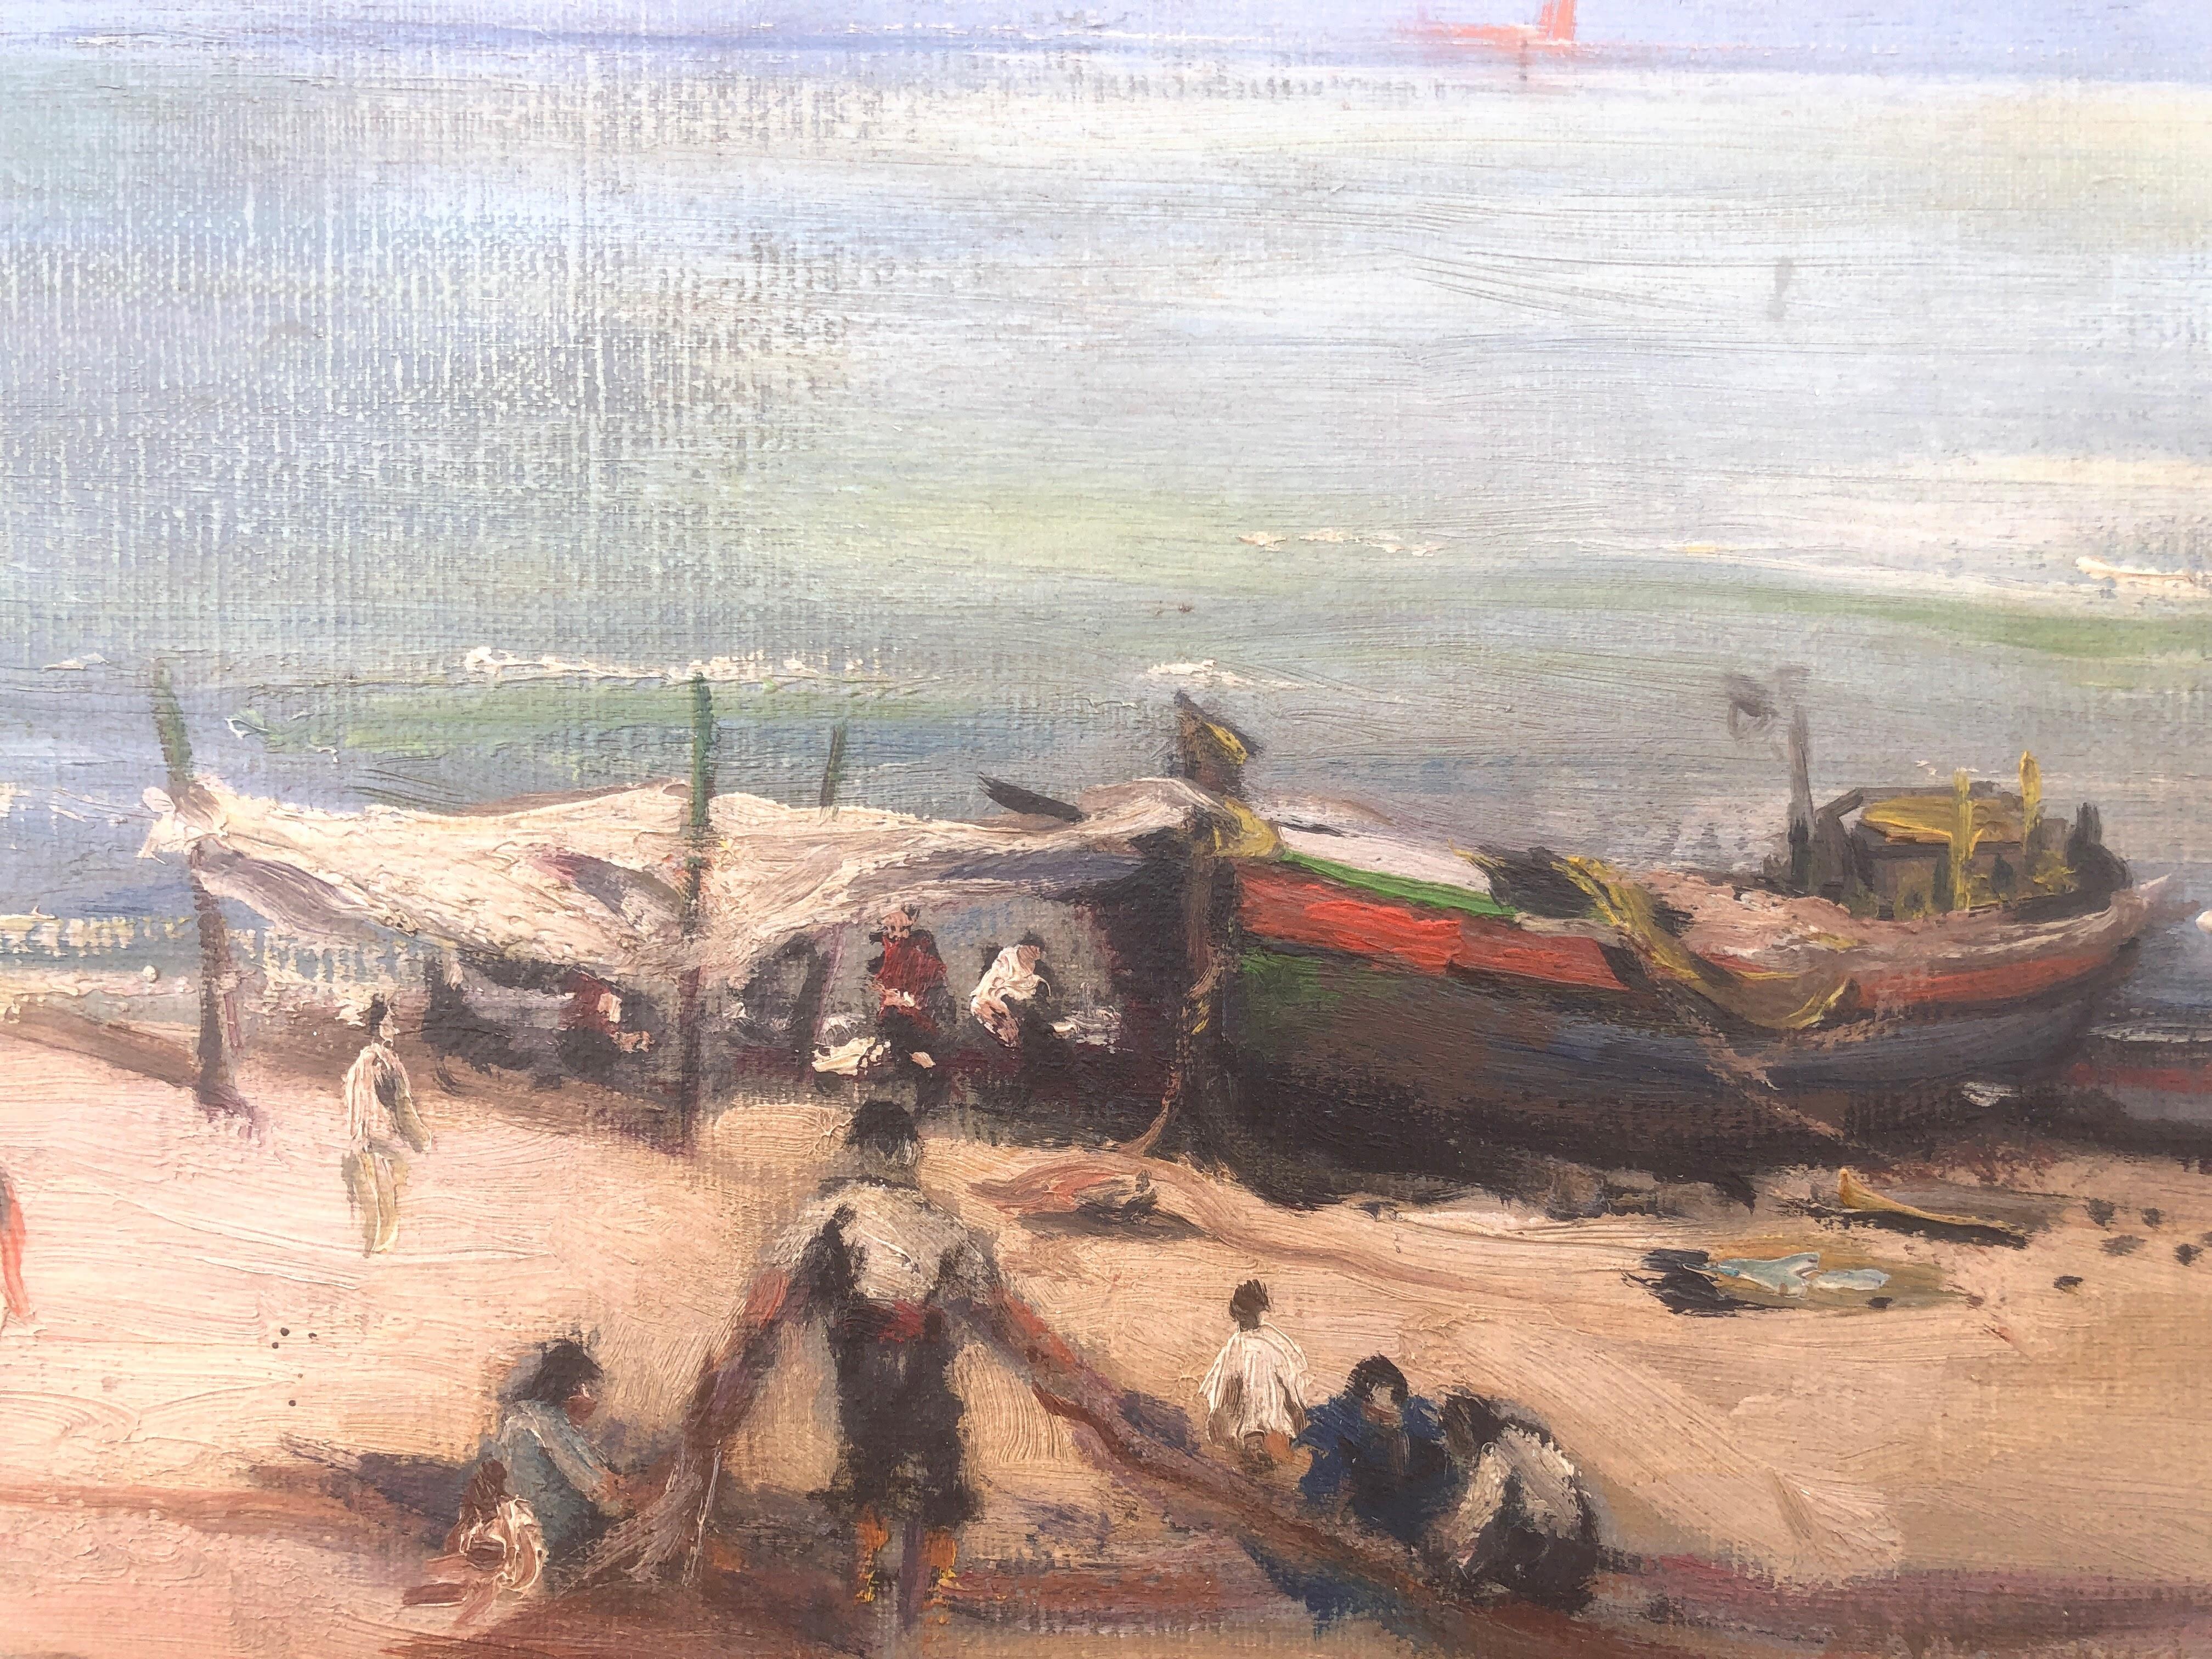 Joaquín Asensio Mariné (1890-1961) - Beach - Oil on canvas
Oil measures 65x81 cm.
Frame measures 81x96 cm.

Asensio Mariné (Barcelona, 1890-1961) was a painter who specialized in landscapes, figures and still lifes of marked realism, that carried